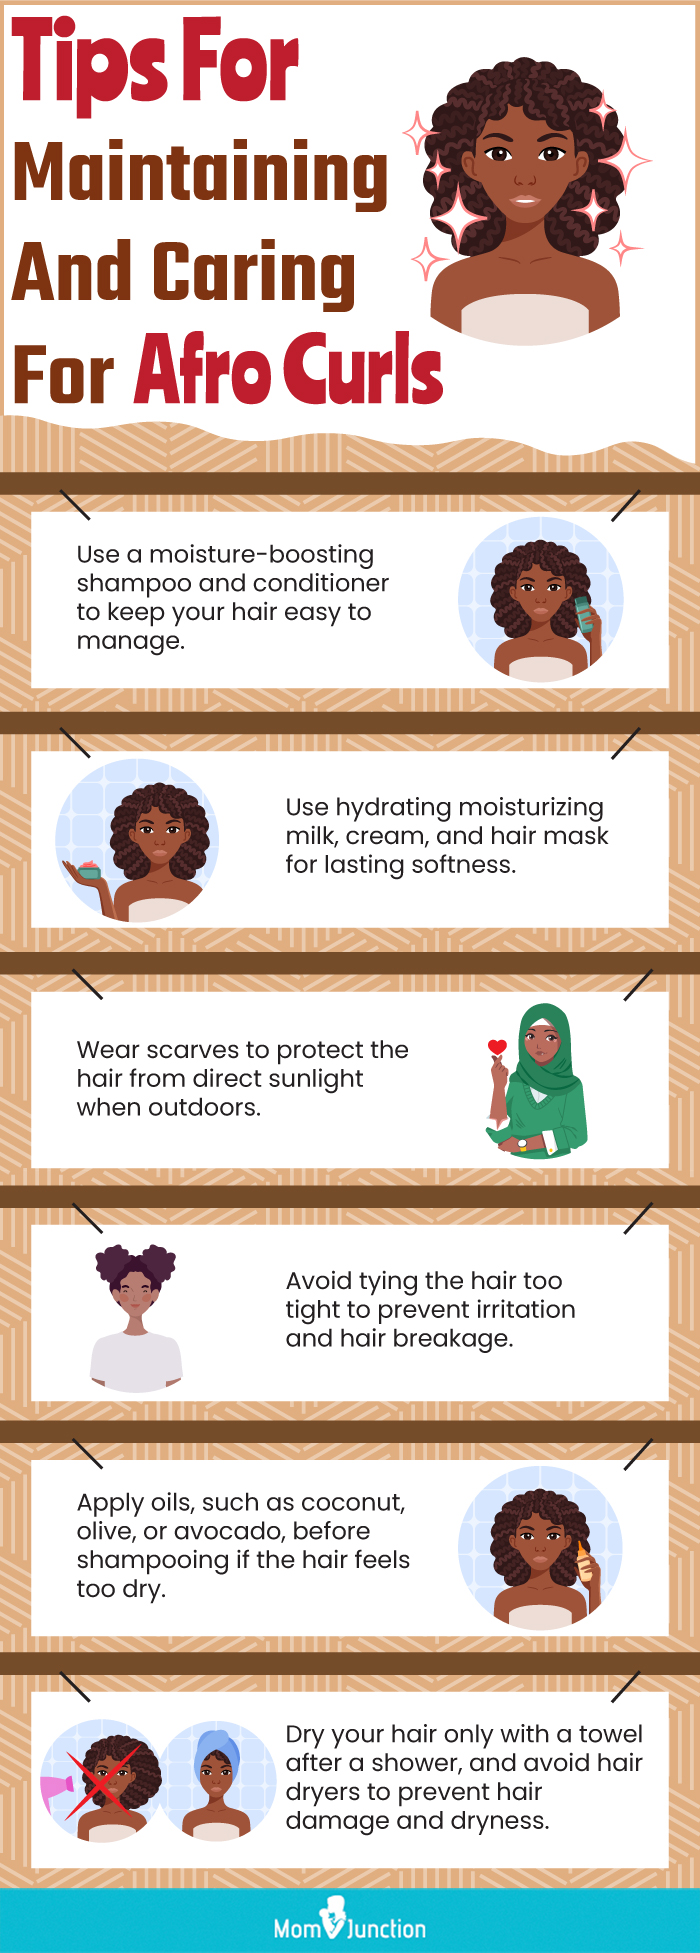 tips for maintaining and caring for afro curls (infographic)